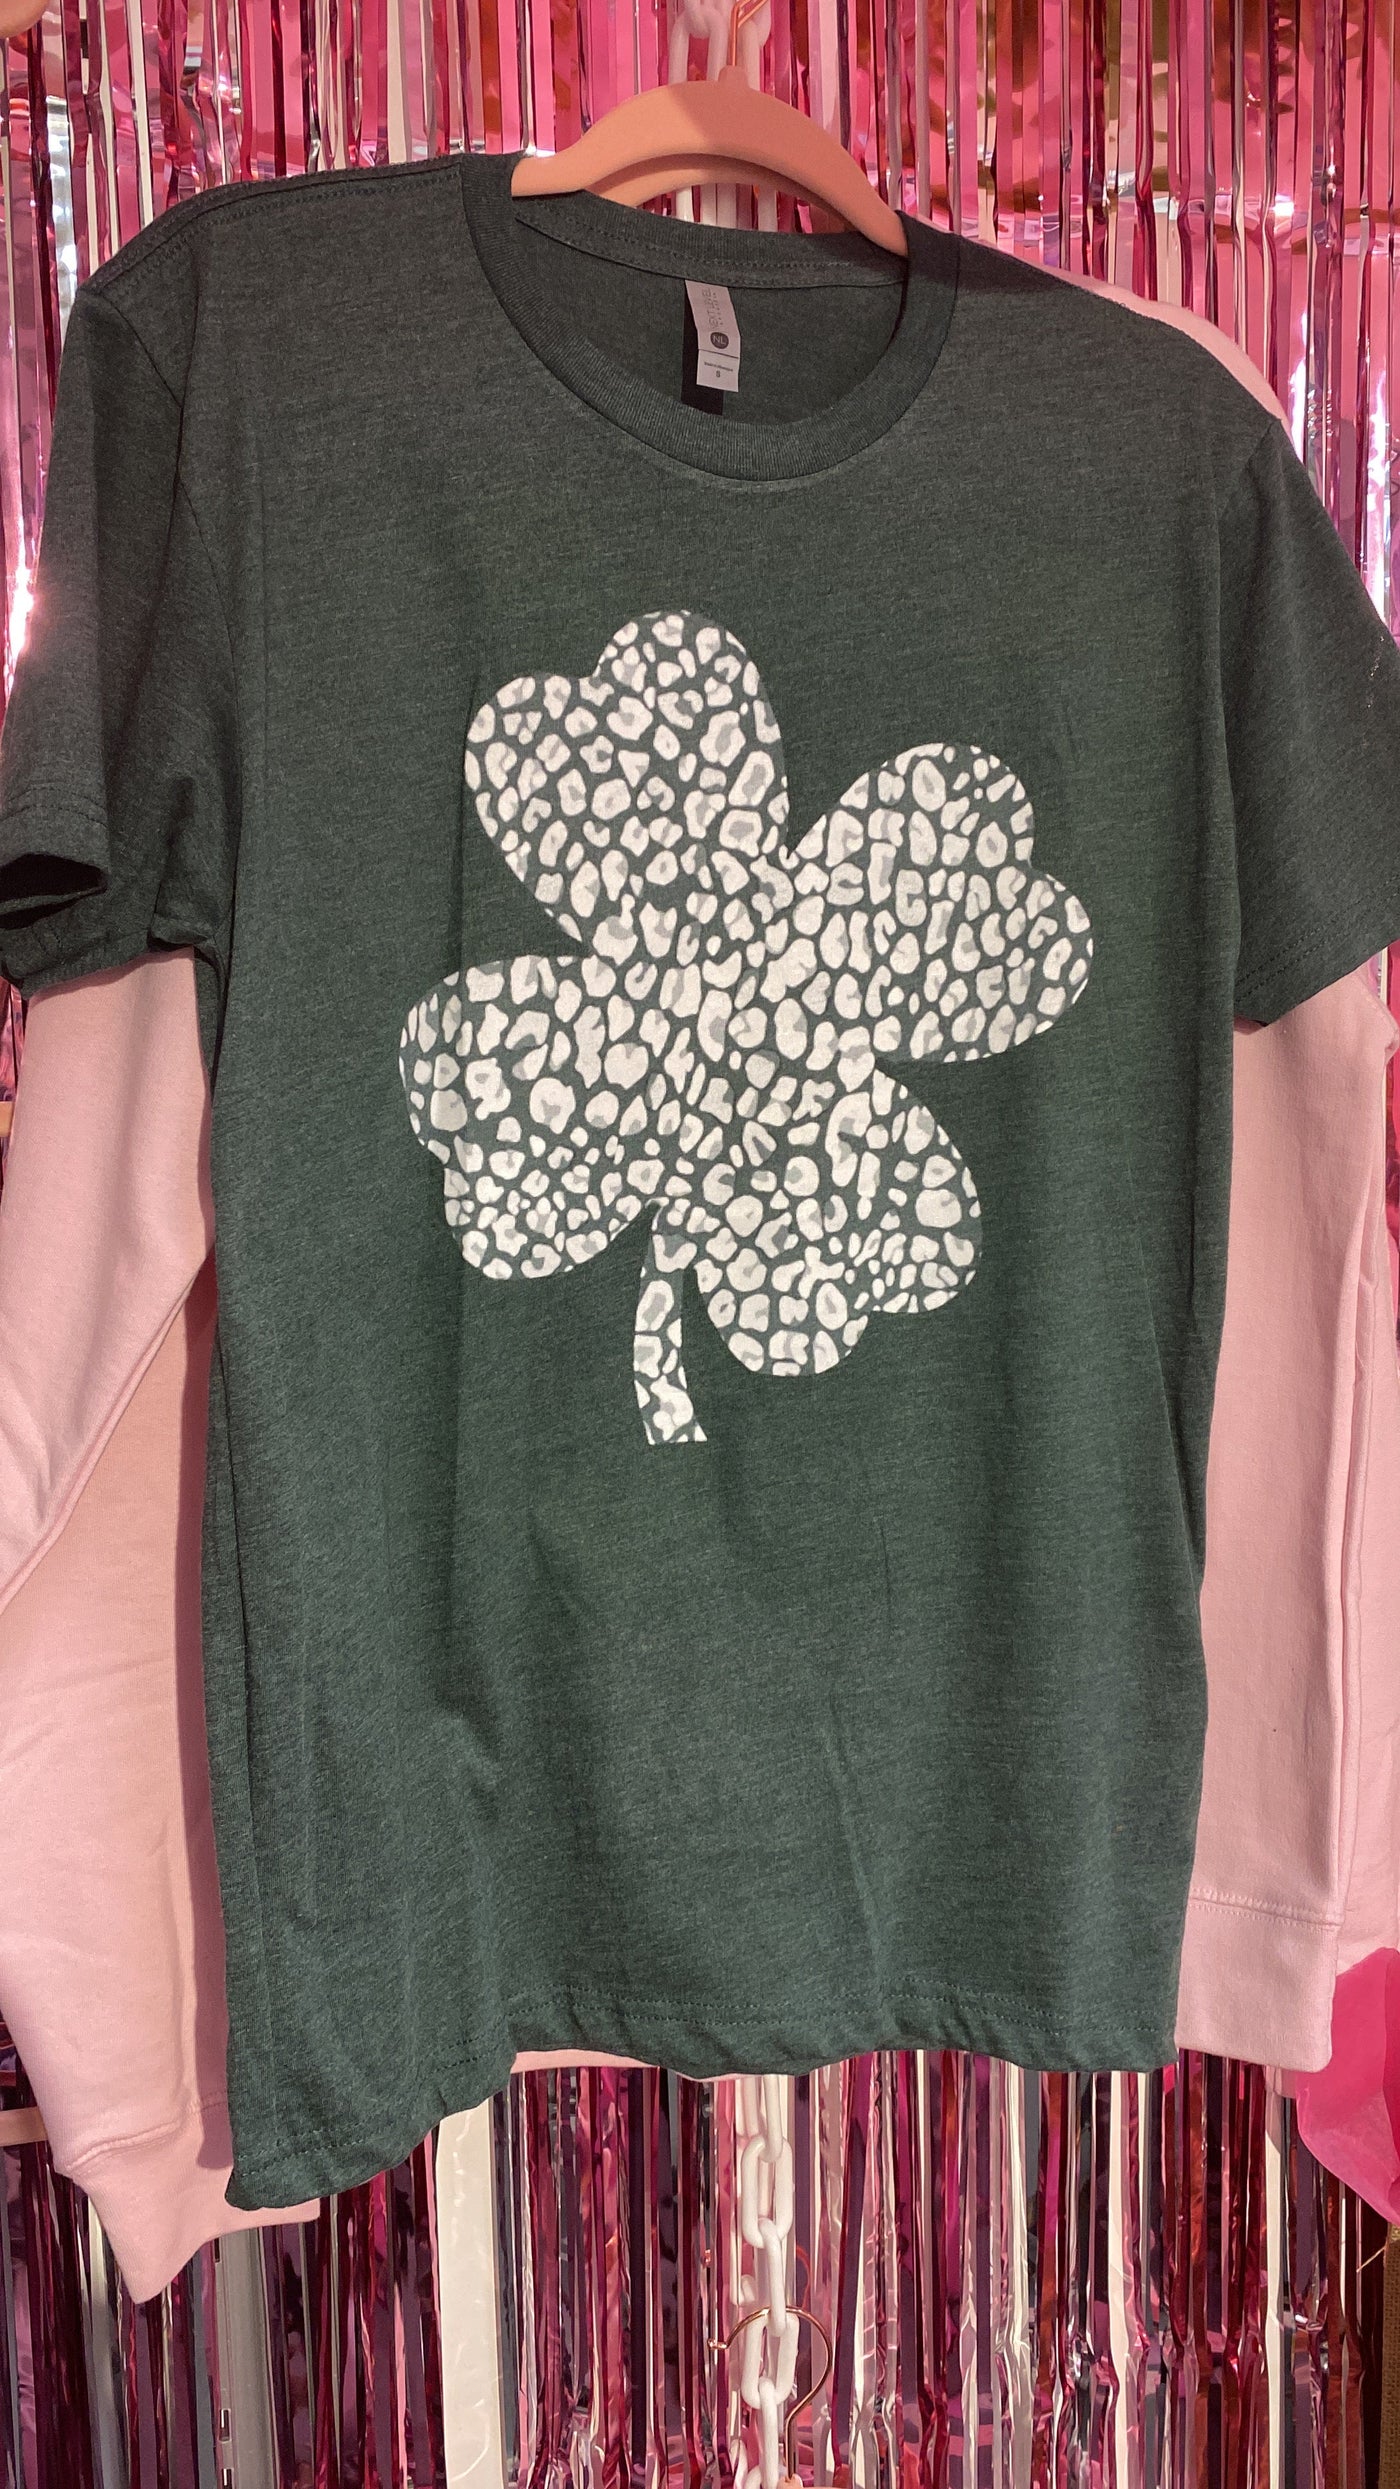 Black tee with a leopard print 4 leaf clover